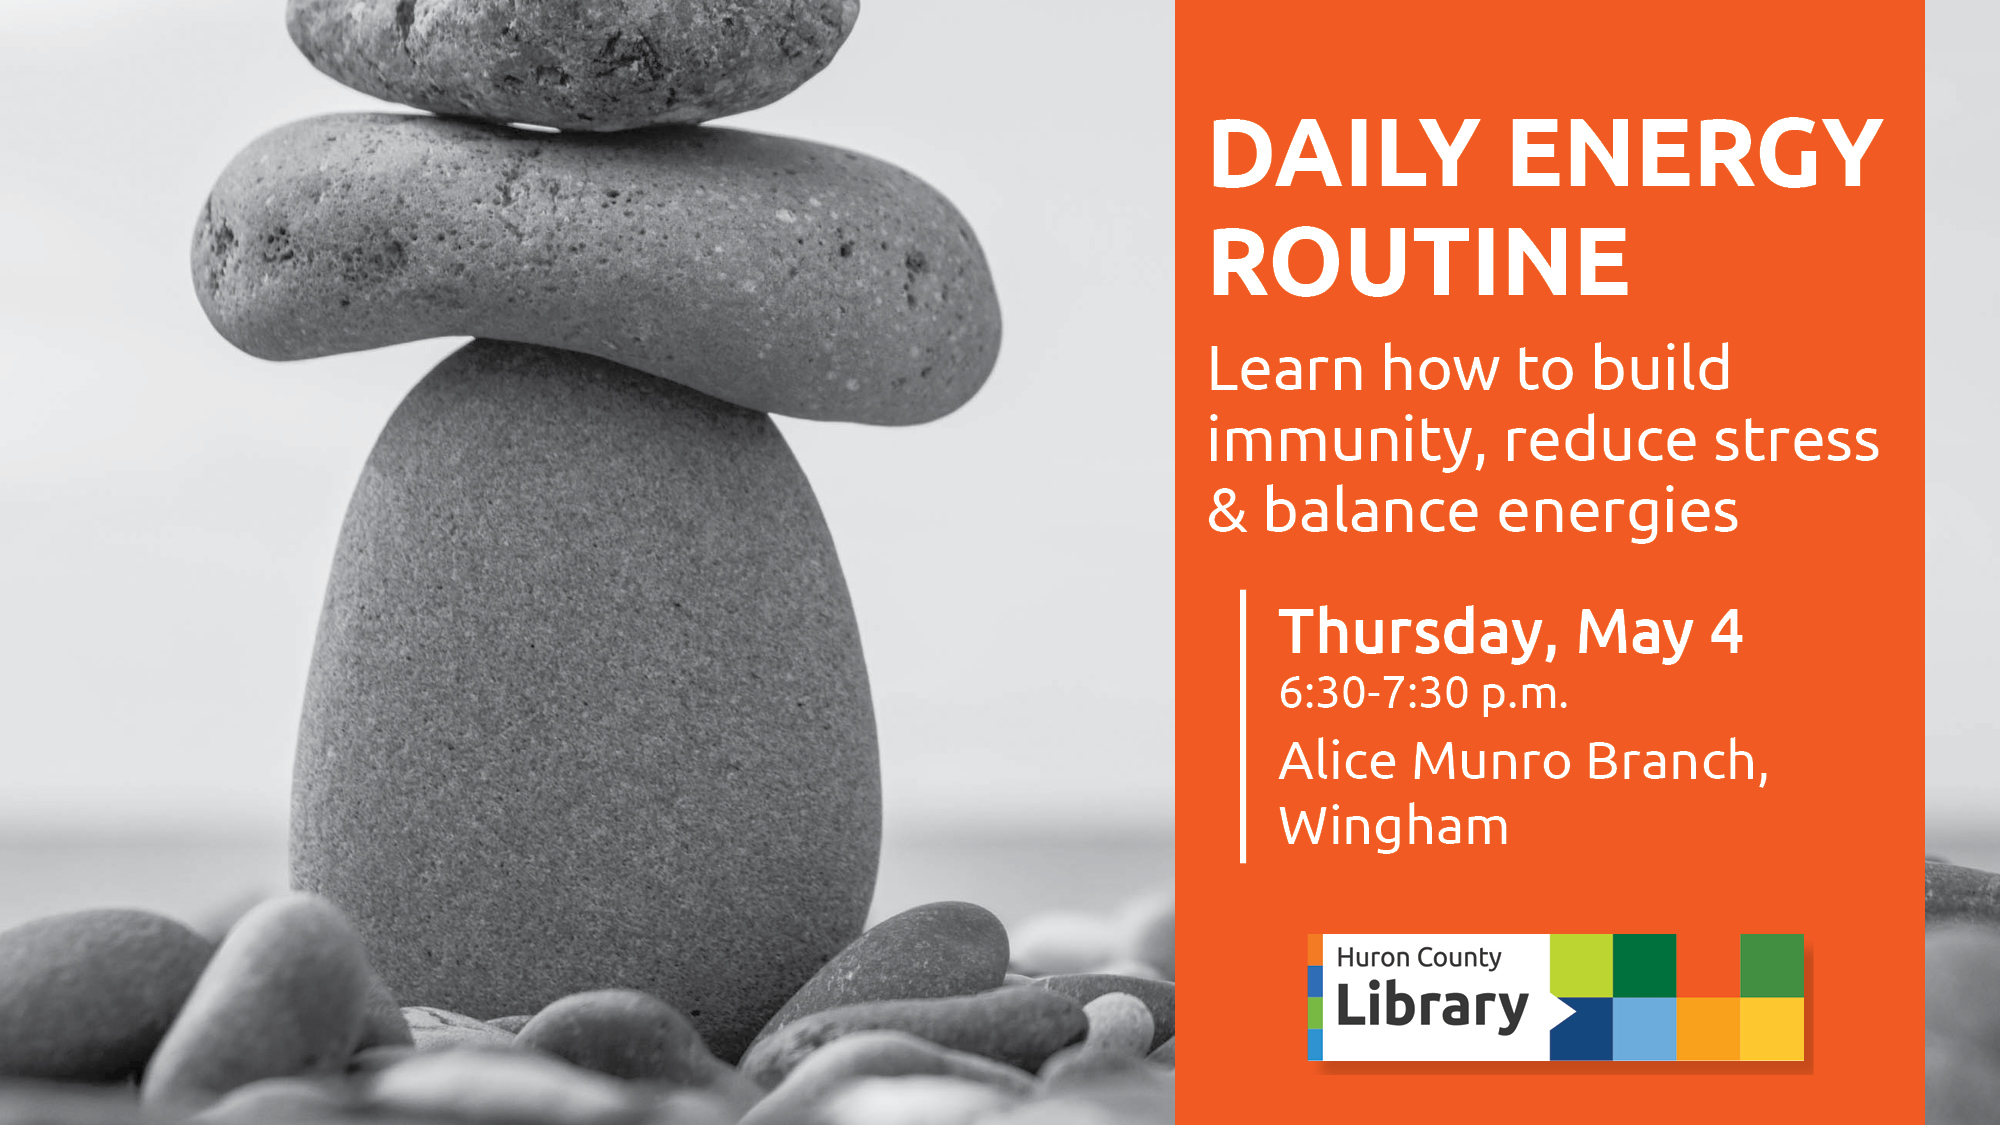 Black and white image of balancing stones with text promoting Daily Energy Routine information night at Alice Munro Branch, Wingham